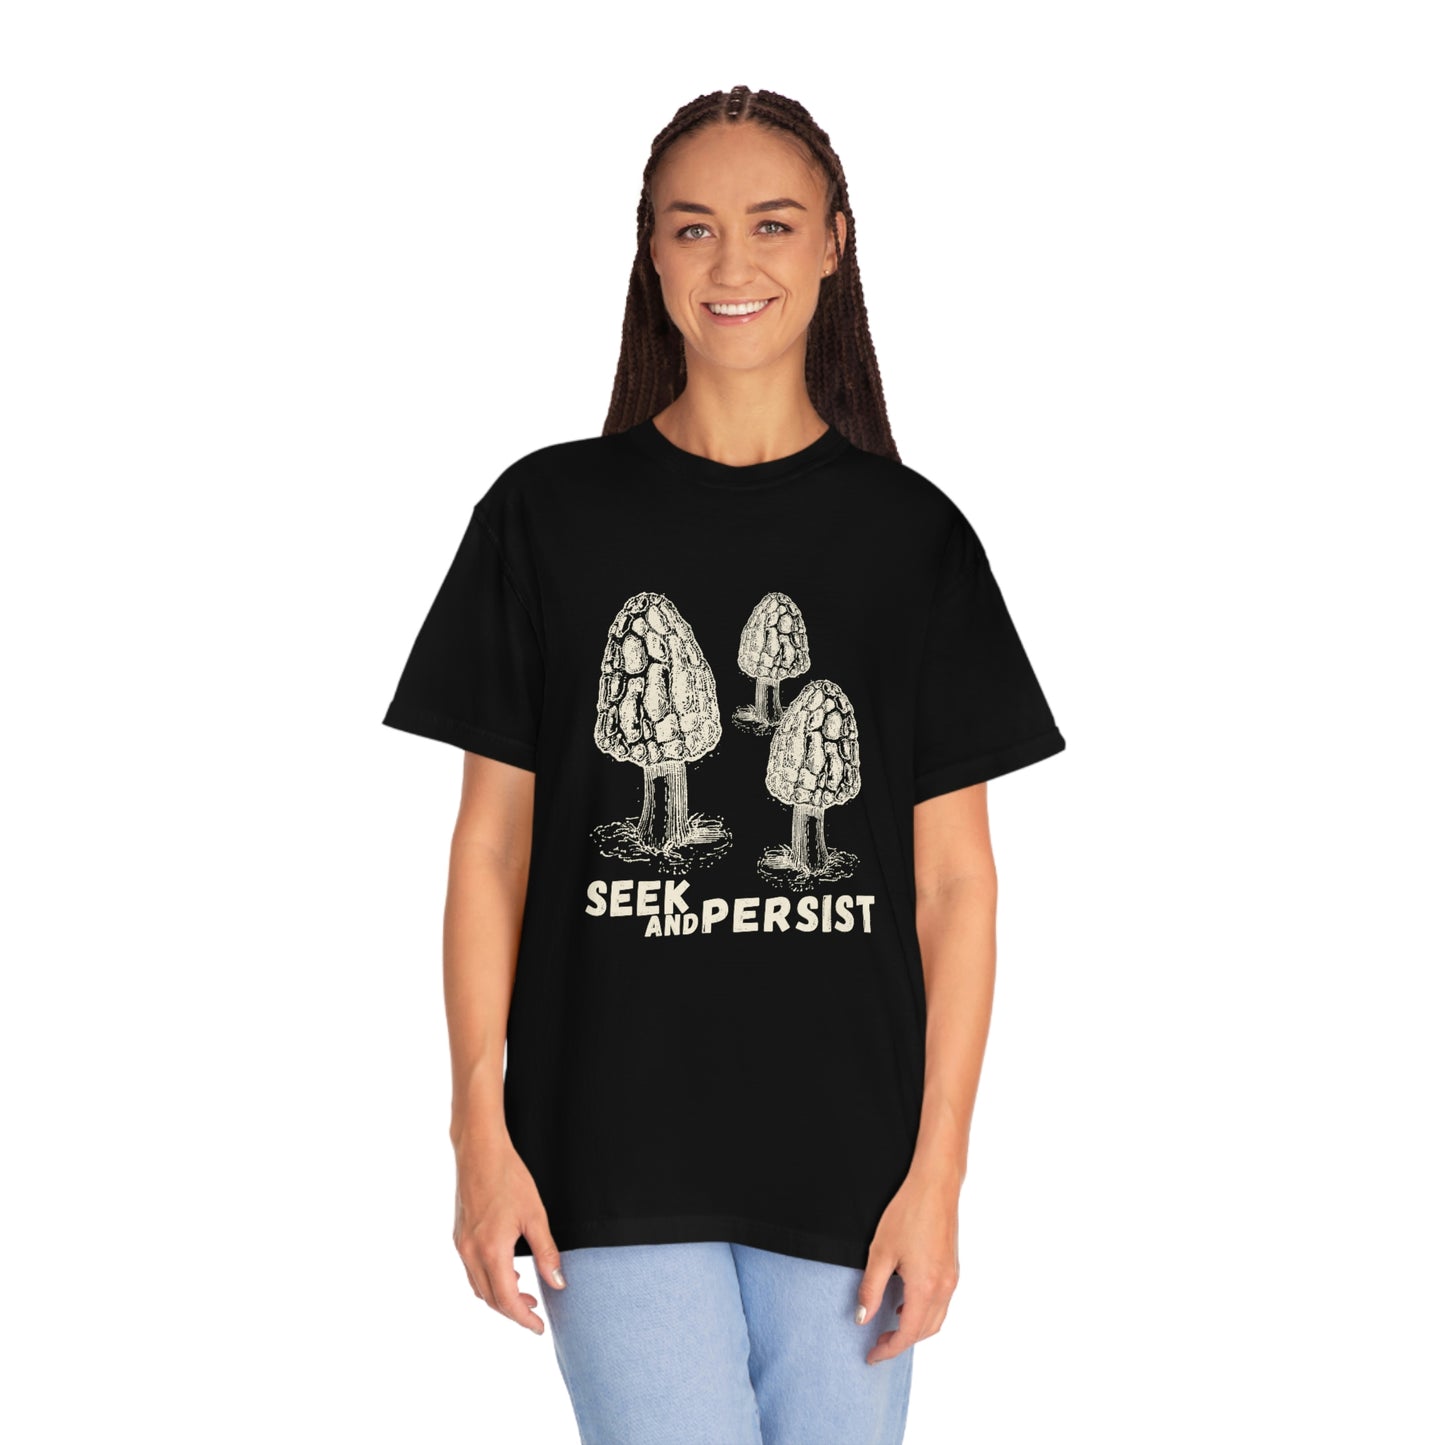 SEEK AND PERSIST-Unisex Garment-Dyed T-shirt